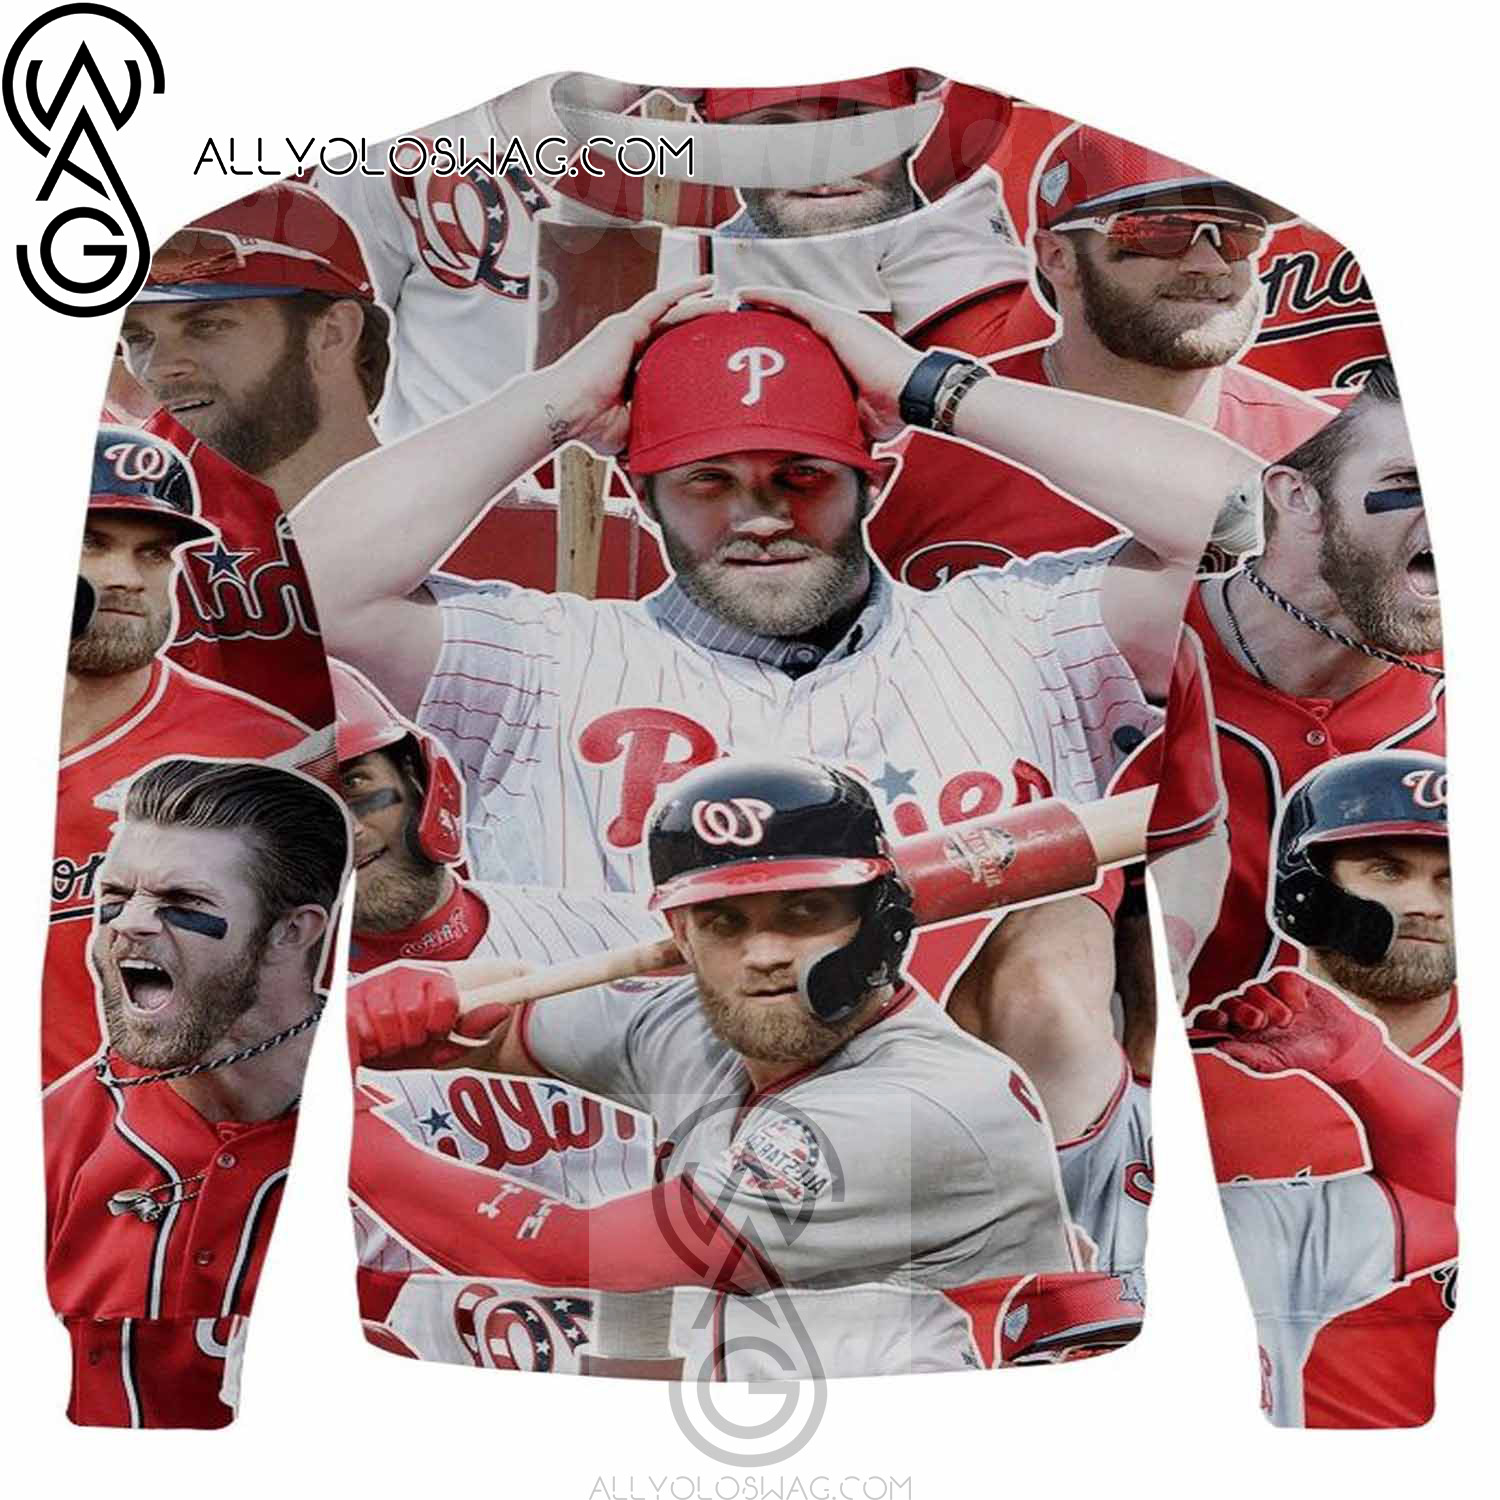 Bryce Harper Full Printing Ugly Christmas Sweater